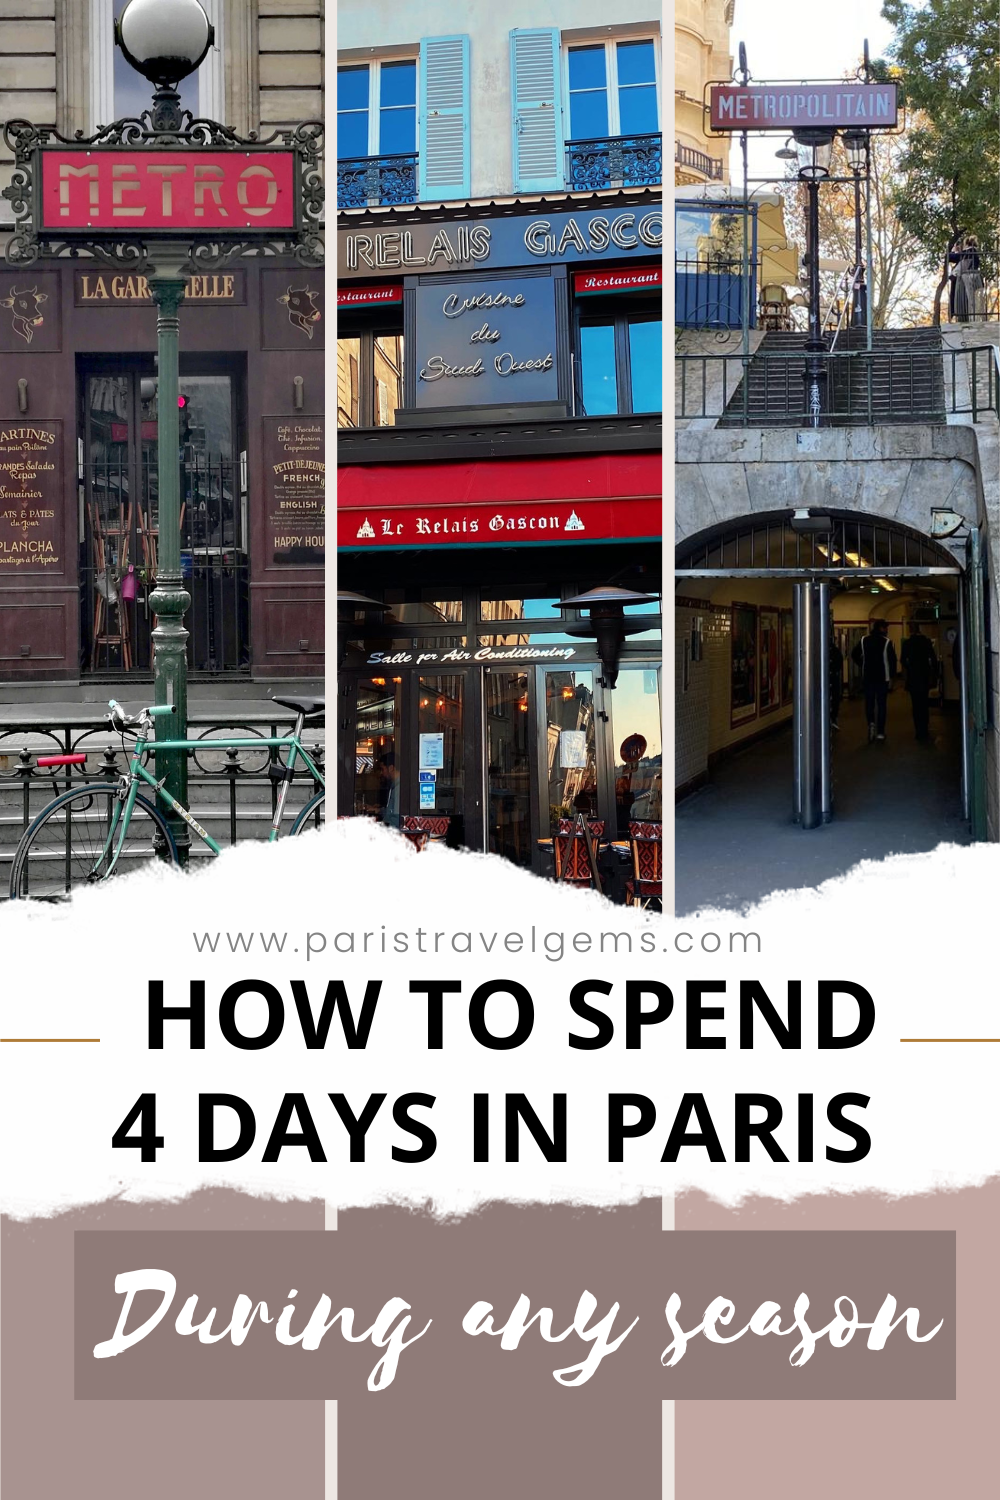 How To Spend A 4-Day Parisian Adventure For Every Season